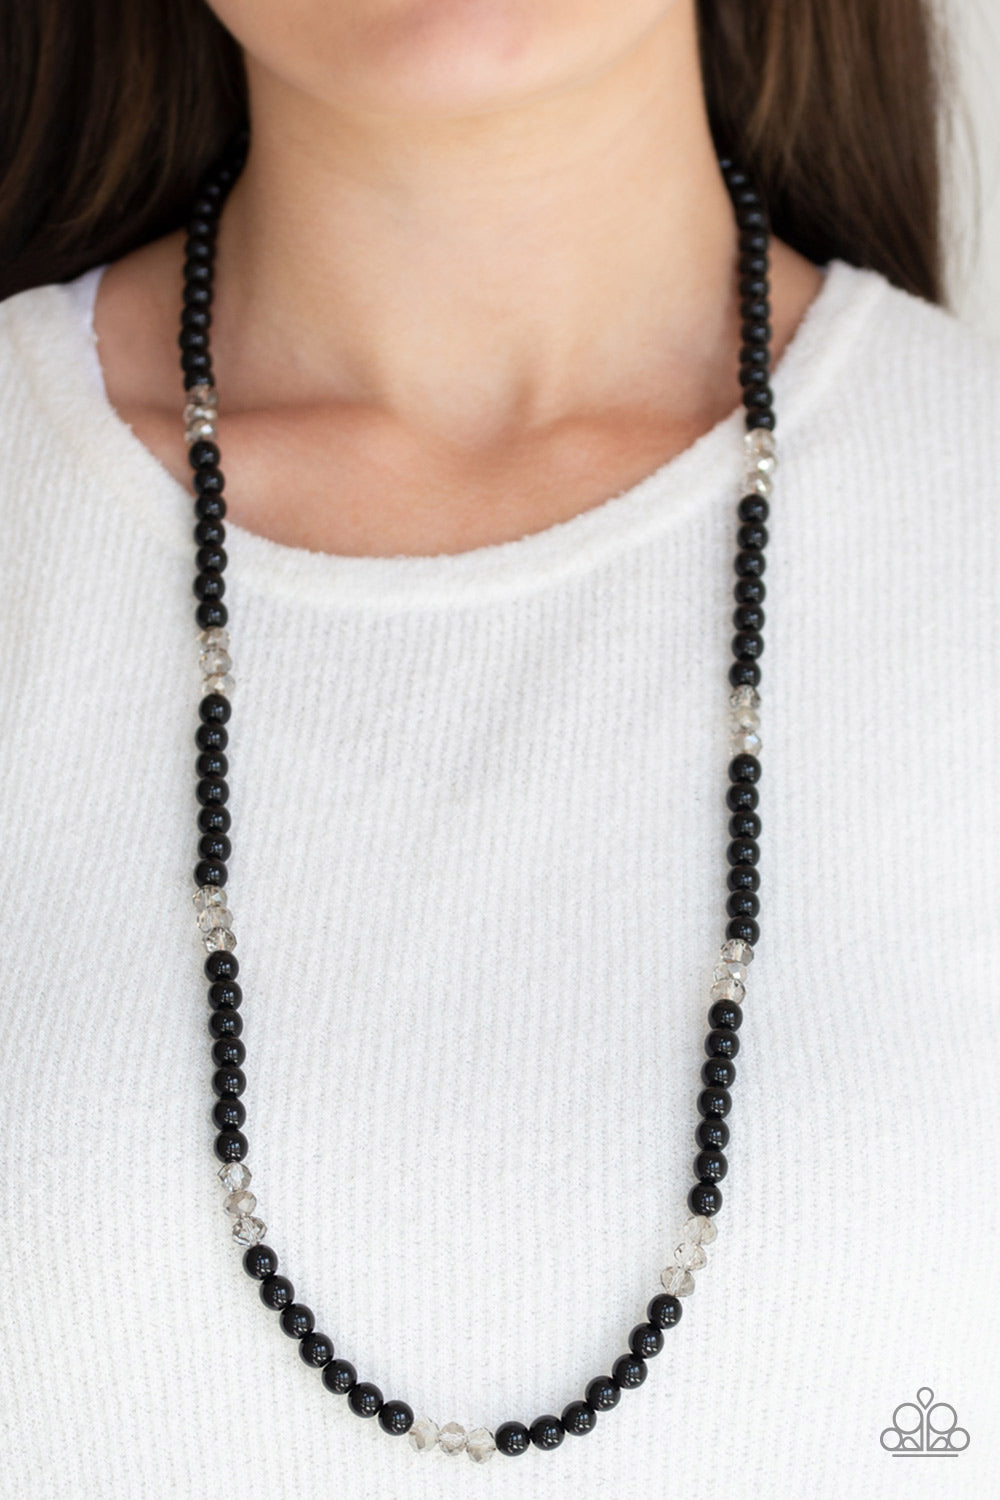 Girls Have More FUNDS - black - Paparazzi necklace